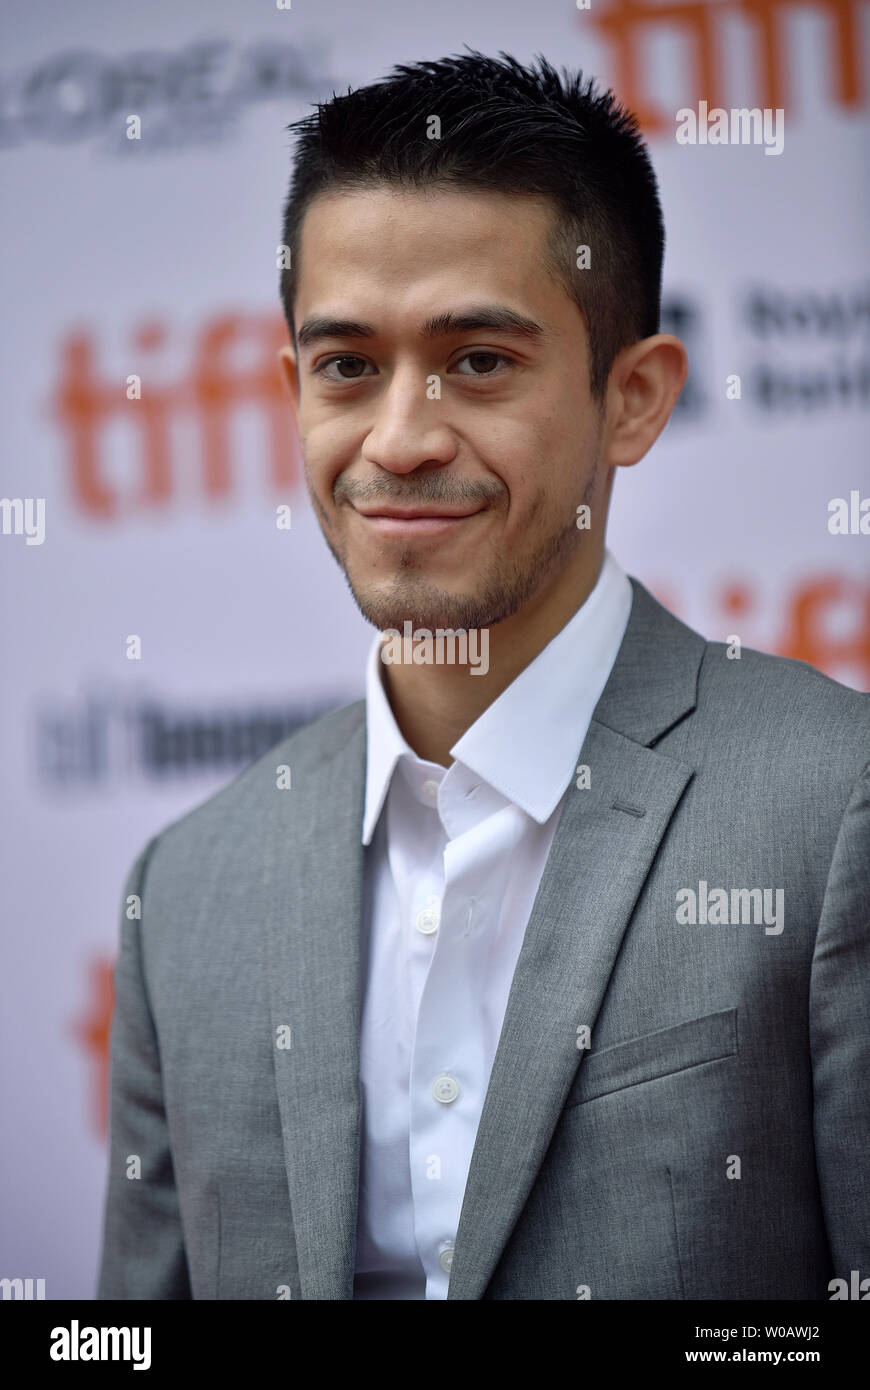 David Zaldivar arrives for the premiere of 'Ben Is Back' at the Princess of Wales Theatre during the Toronto International Film Festival in Toronto, Canada on September 8, 2018. Photo by Christine Chew/UPI Stock Photo